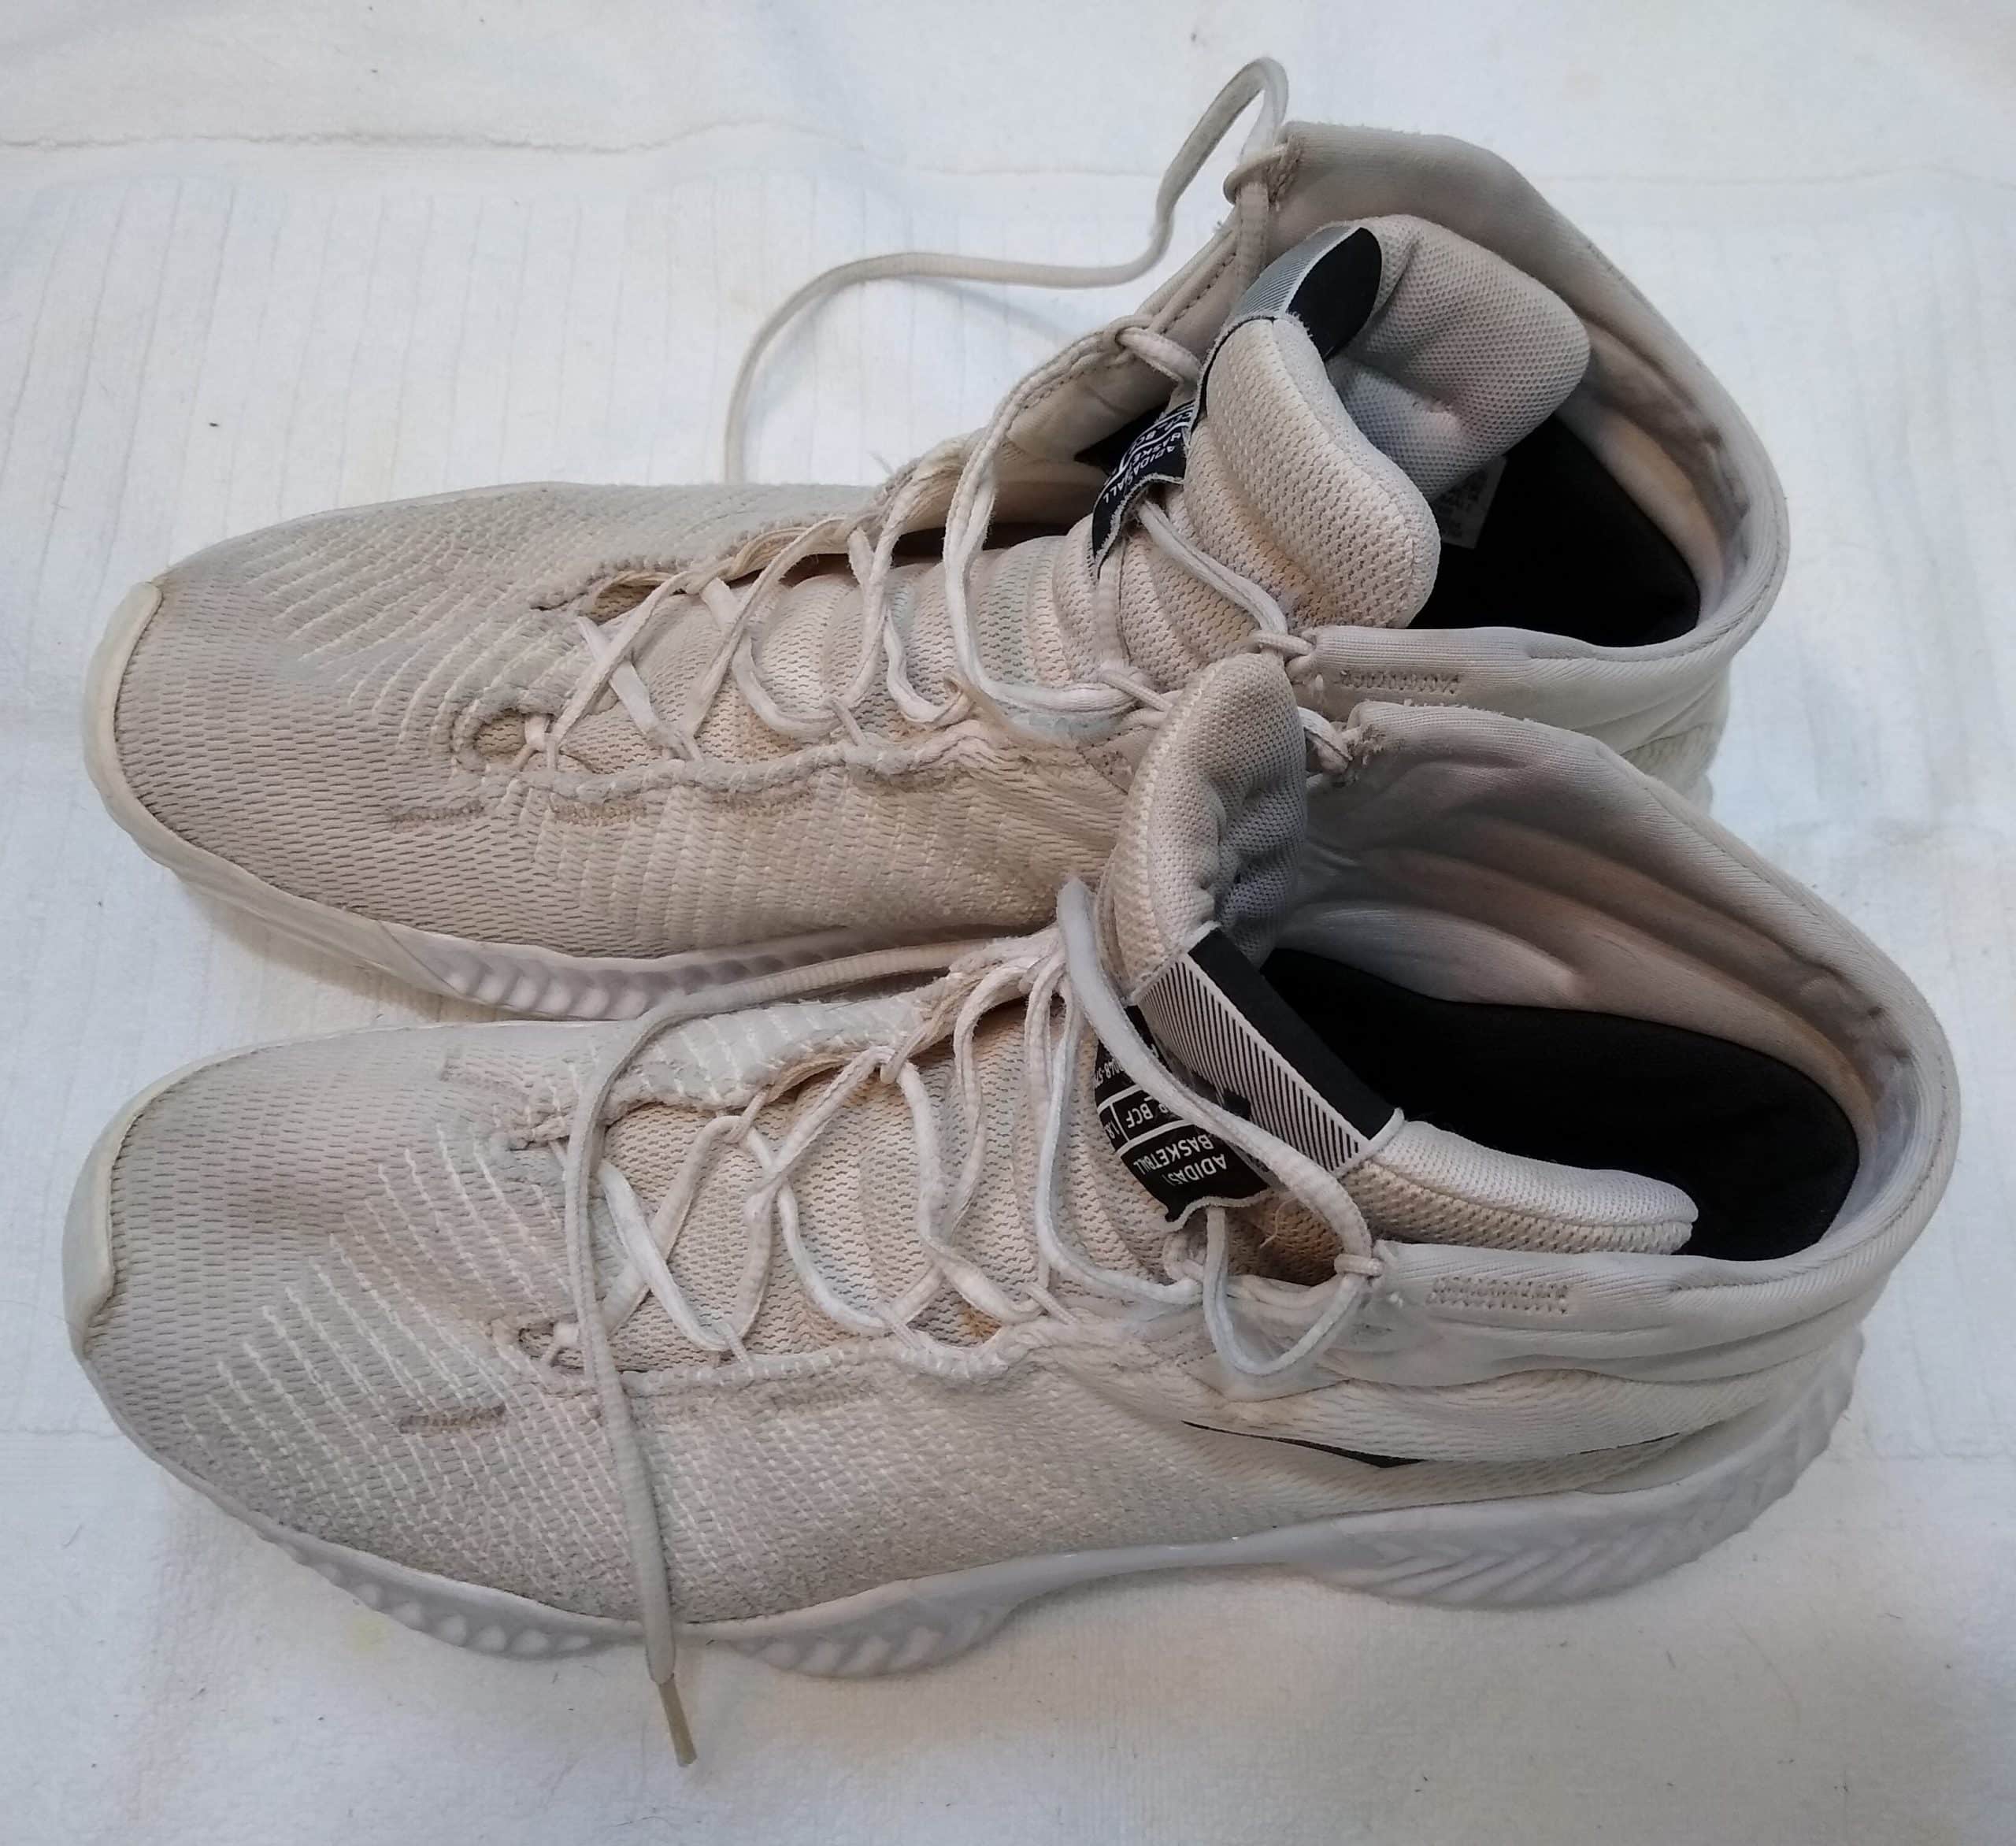 Used Smelly Adidas Basketball Sneakers